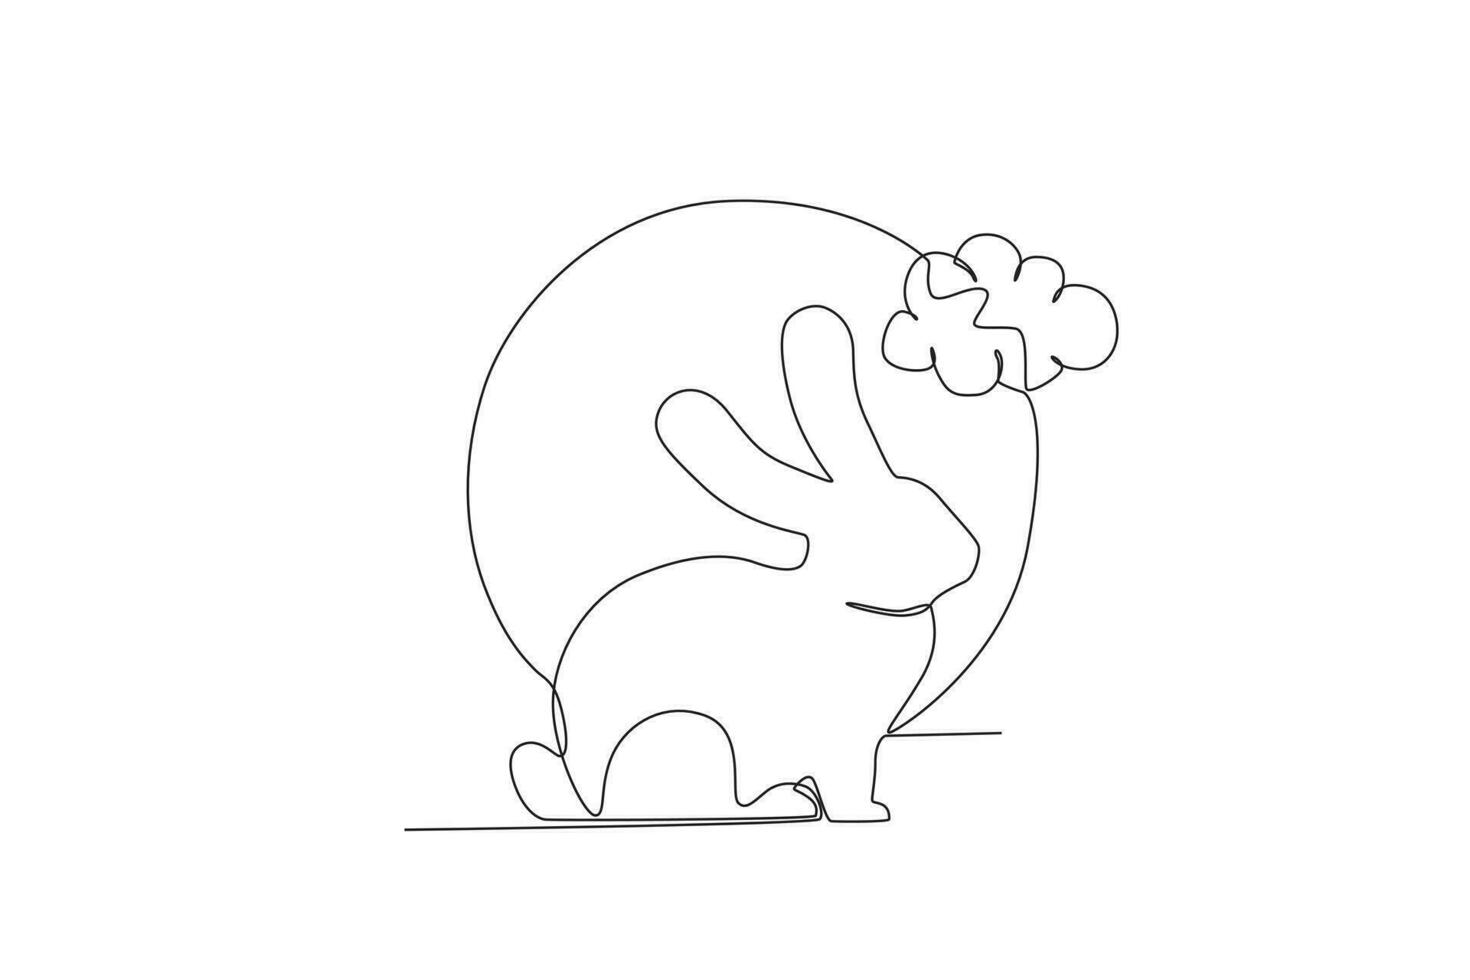 A Little rabbit holding lanterns on the moon. Mid-autumn one-line drawing vector